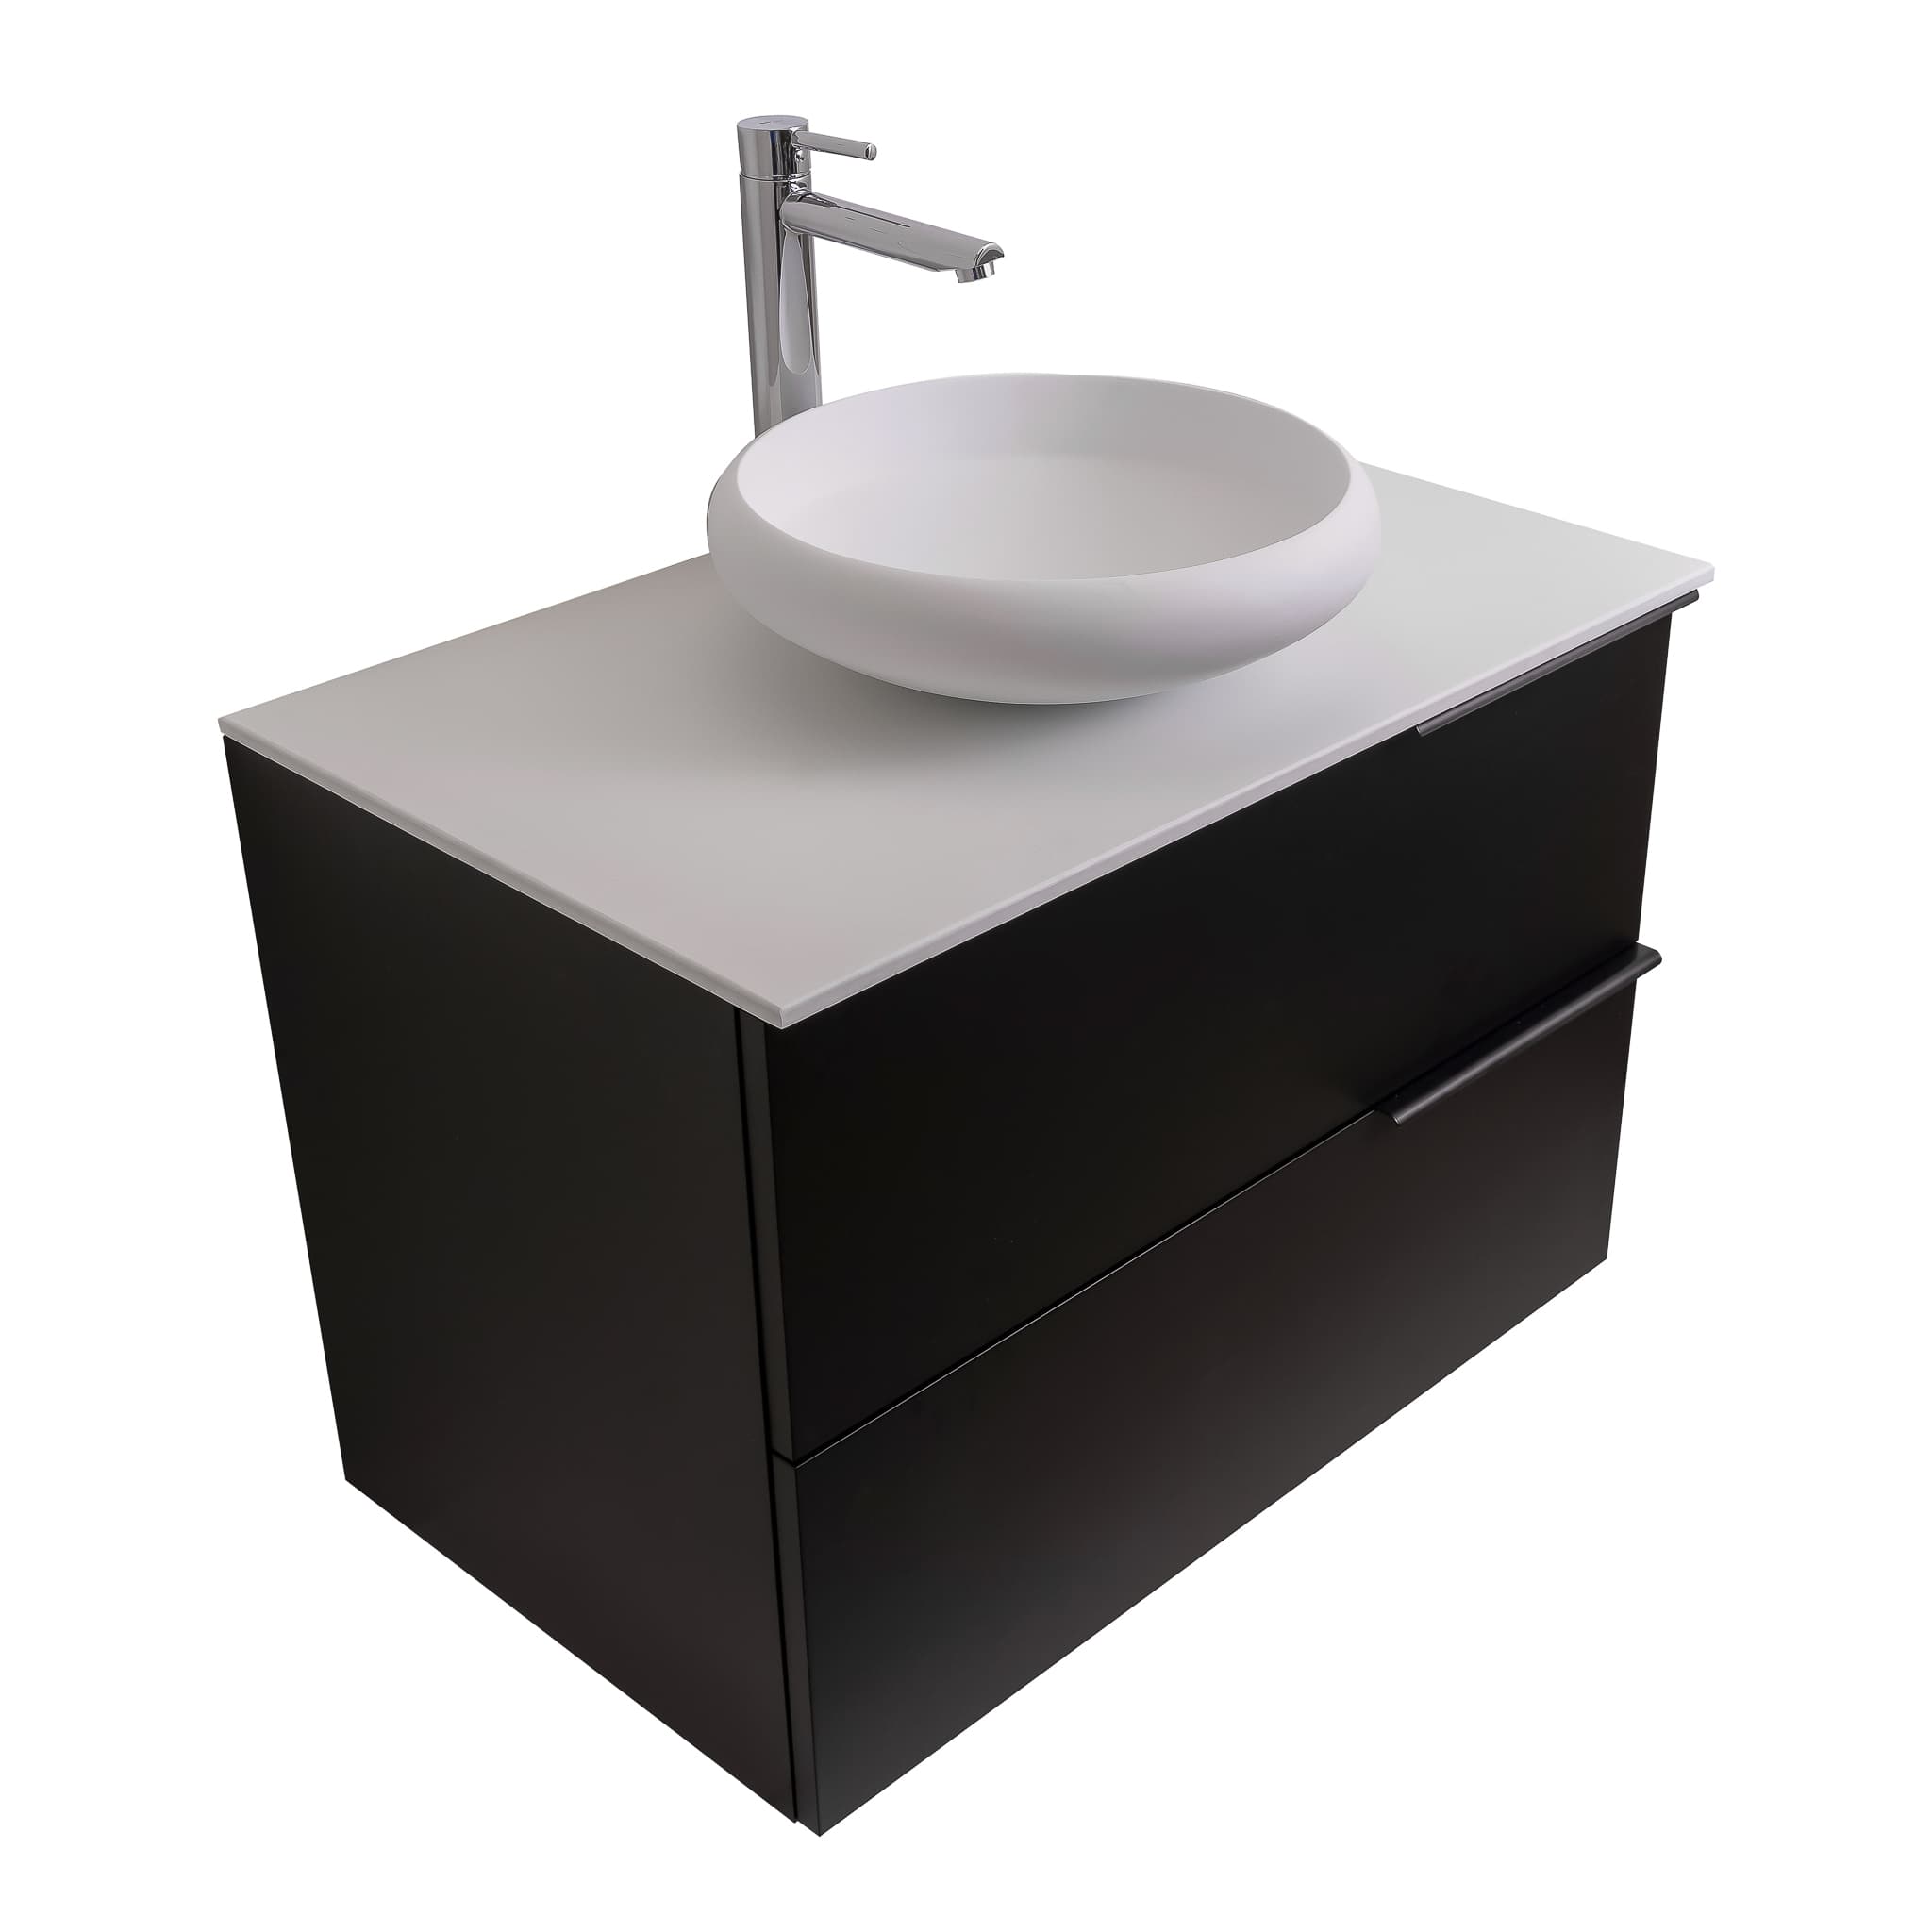 Mallorca 39.5 Matte Black Cabinet, Solid Surface Flat White Counter And Round Solid Surface White Basin 1153, Wall Mounted Modern Vanity Set